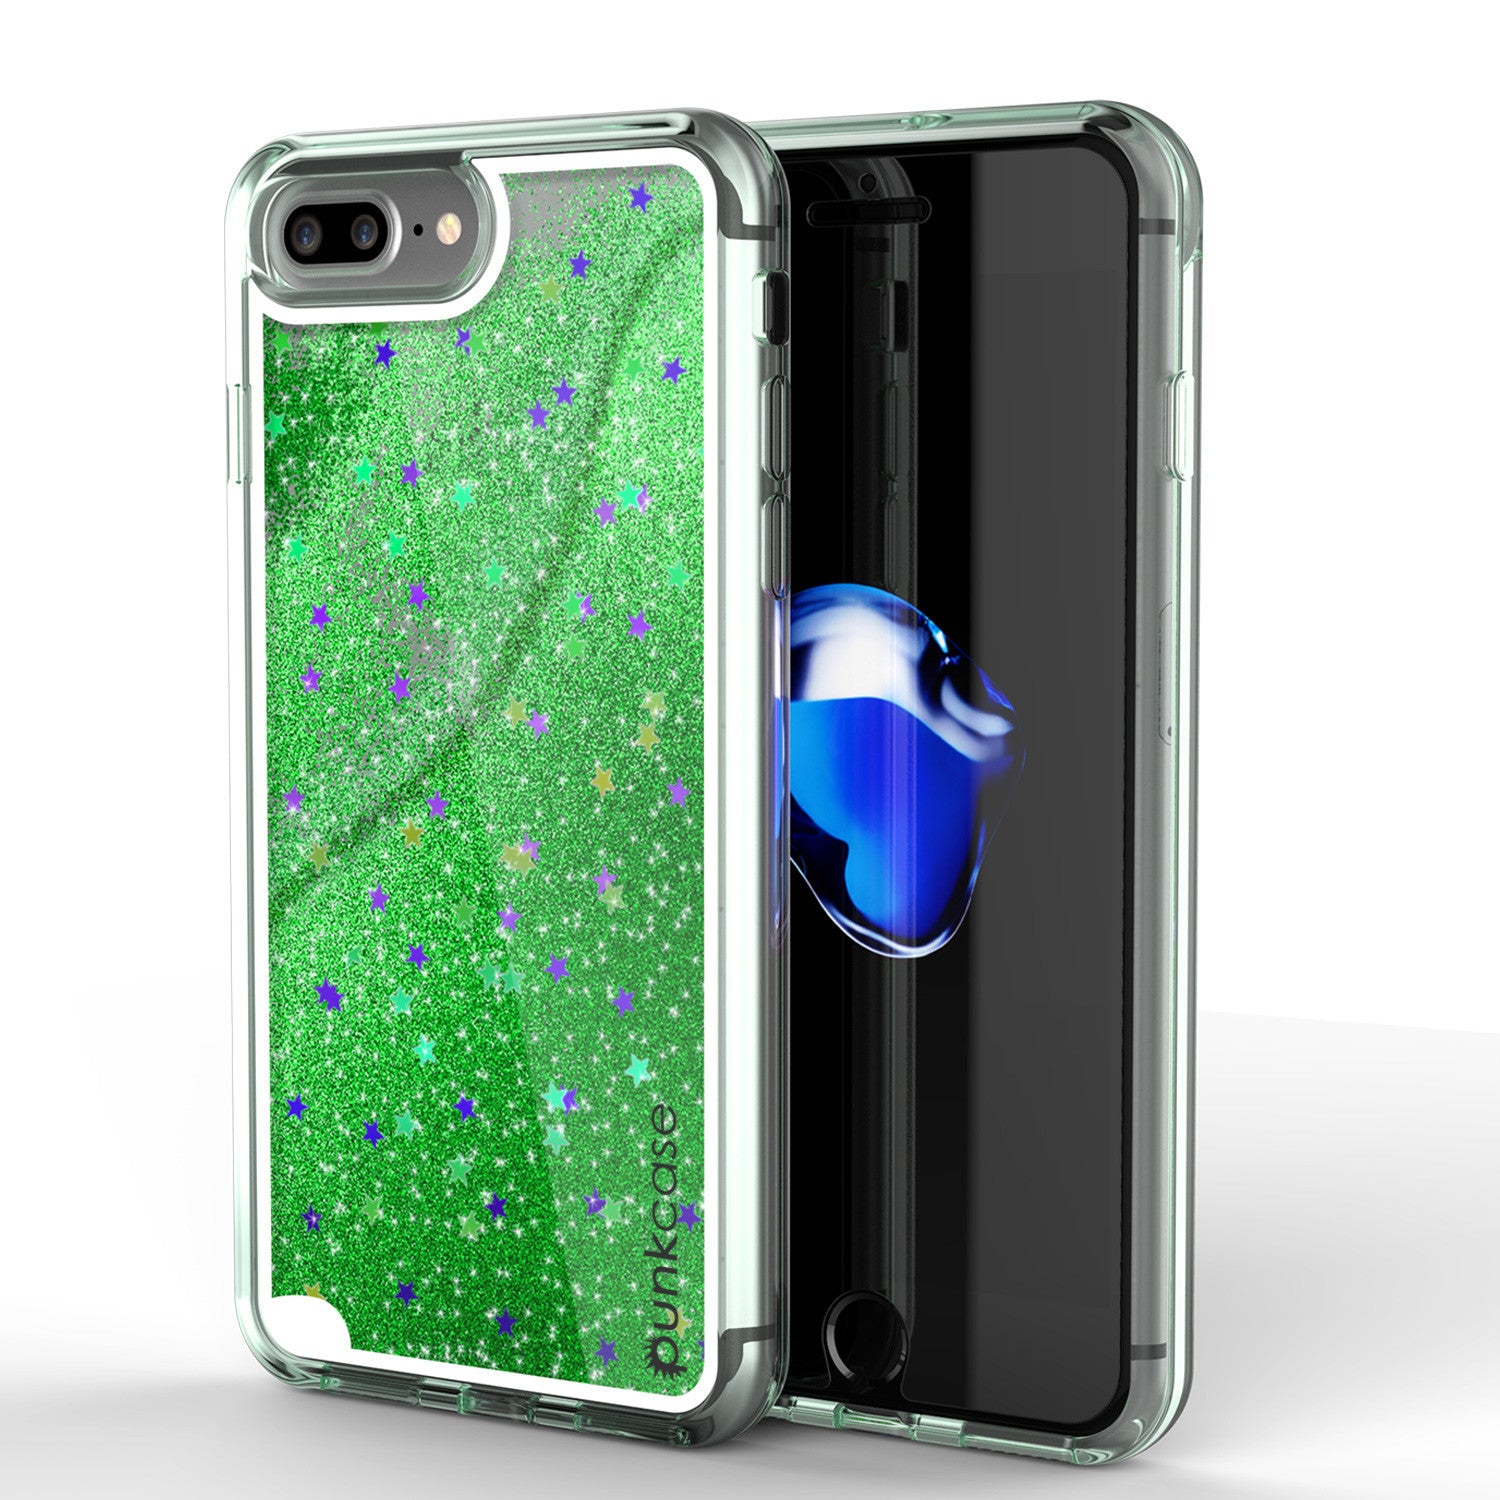 iPhone 7 Plus Case, PunkCase LIQUID Green Series, Protective Dual Layer Floating Glitter Cover